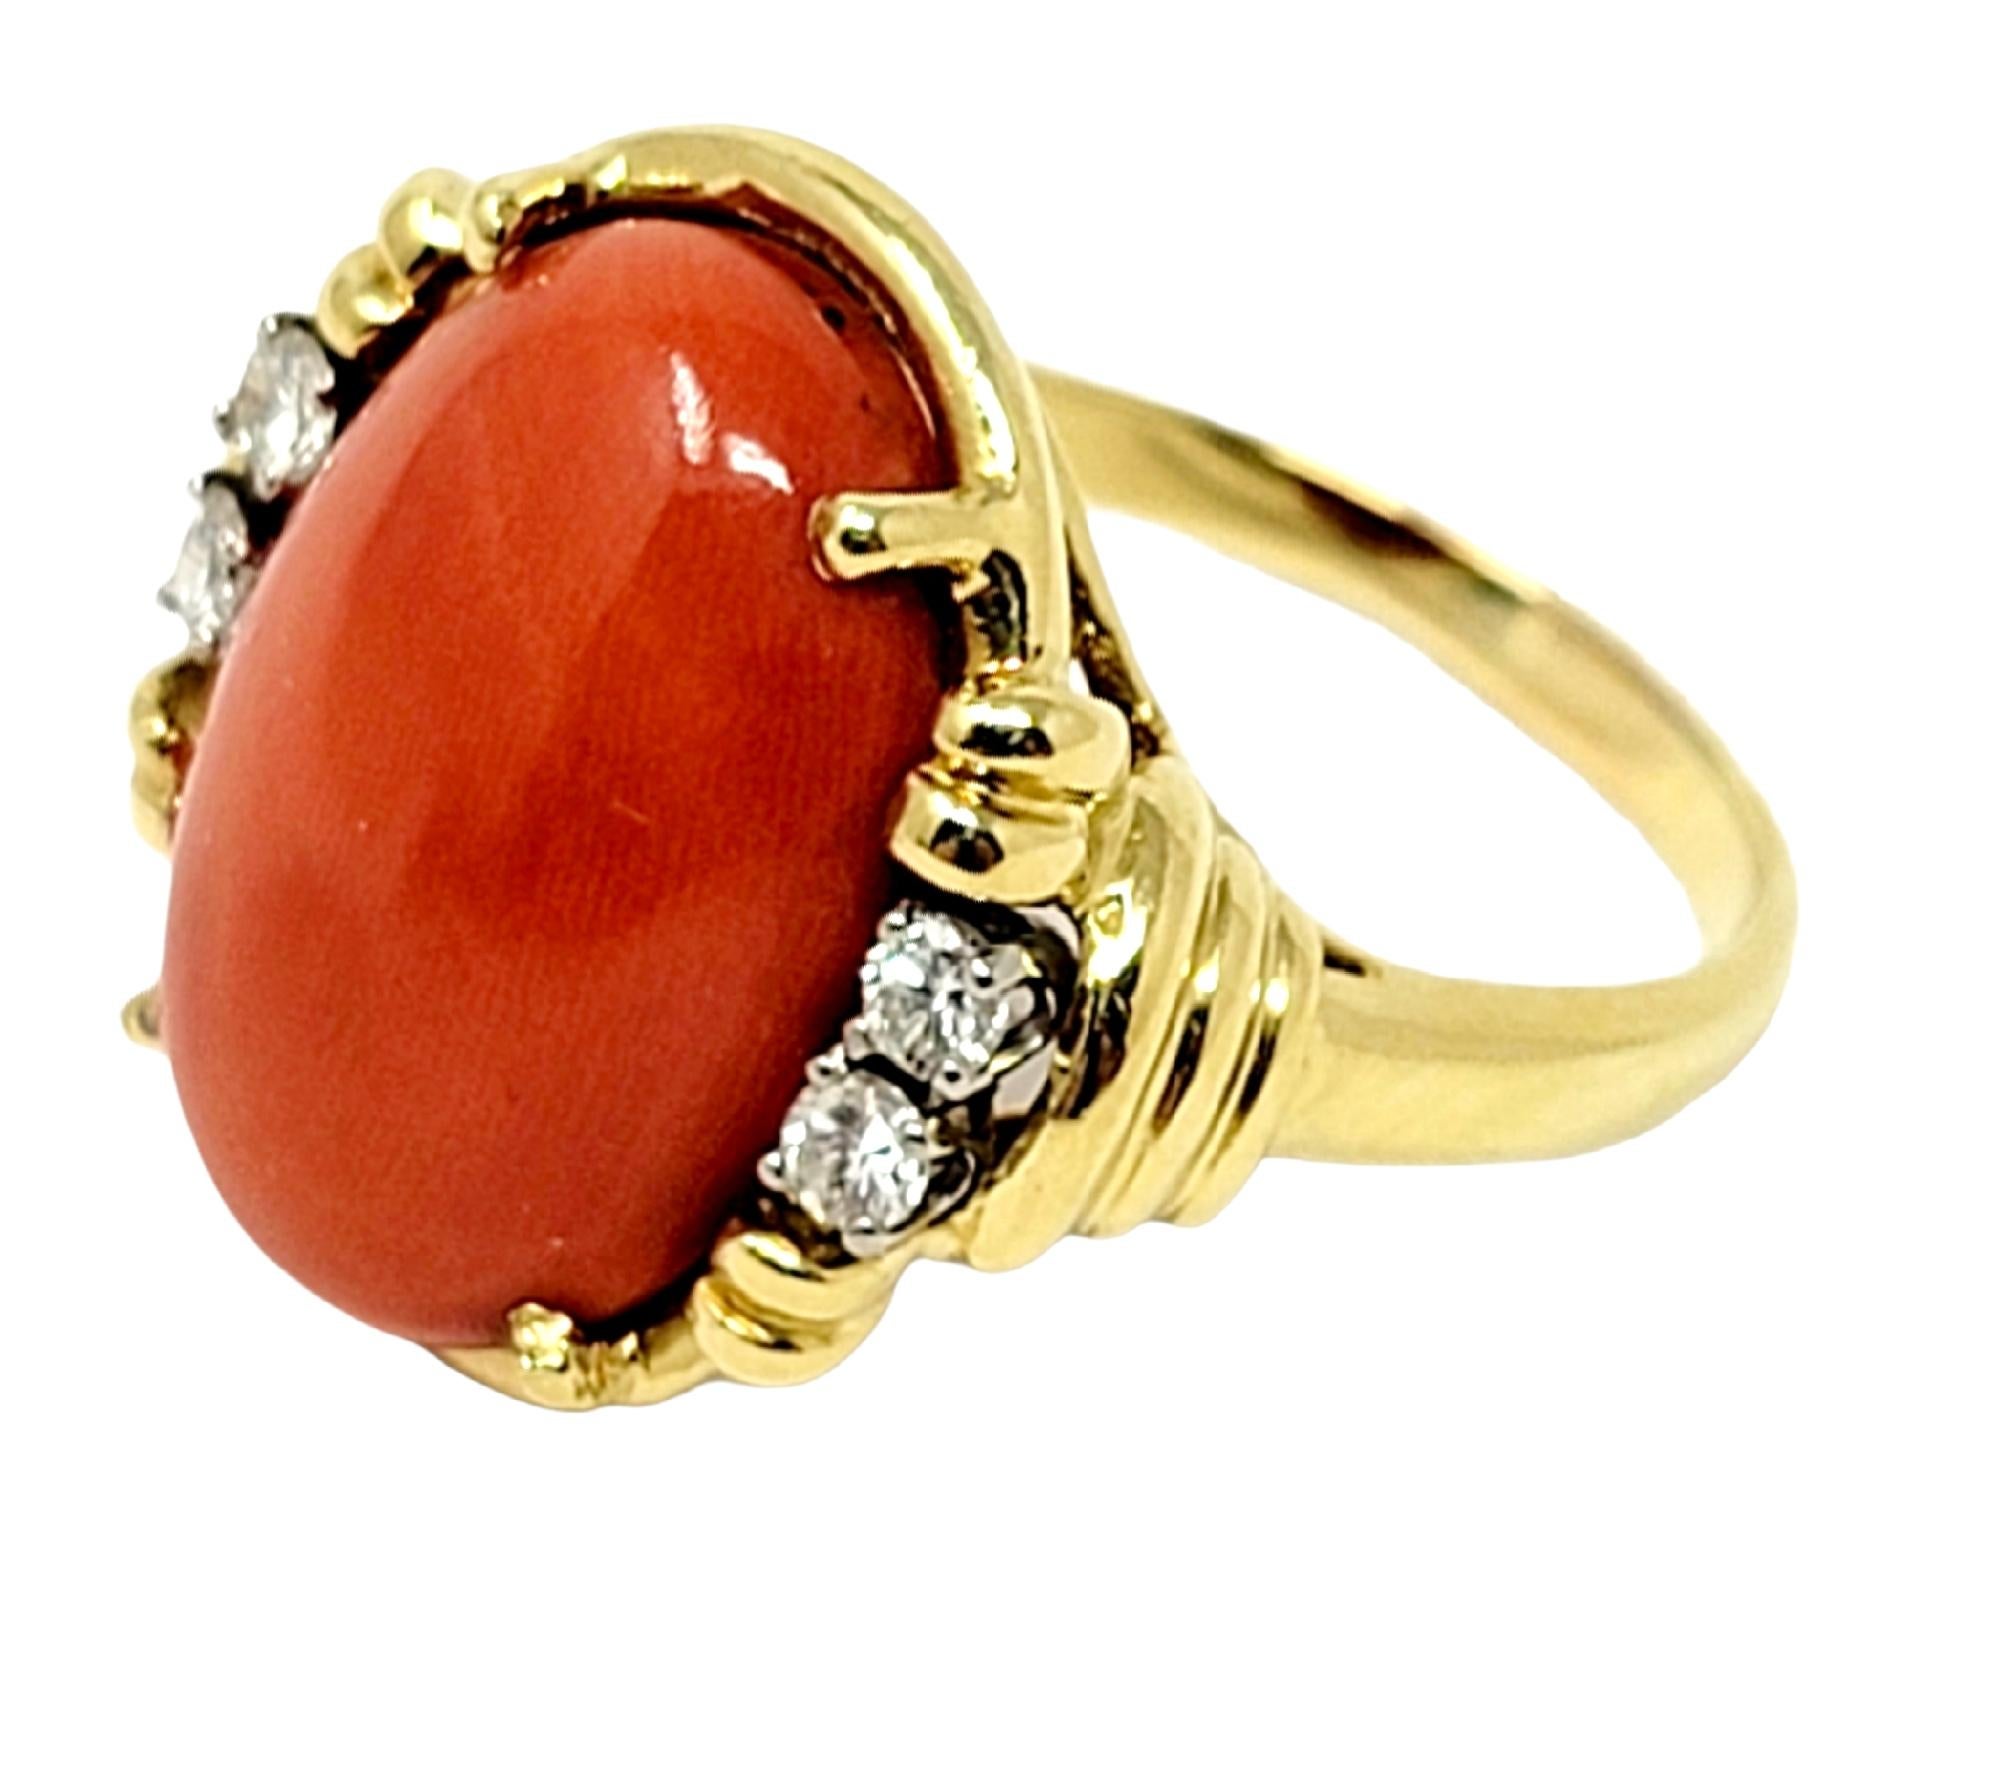 Ring size: 8.75

Featured here is a colorful, elegant vintage coral and diamond cocktail ring. The bright reddish-orange oval stone has a gorgeous high polished finish with several sparkling side diamonds to give it a an extra touch of glamour.